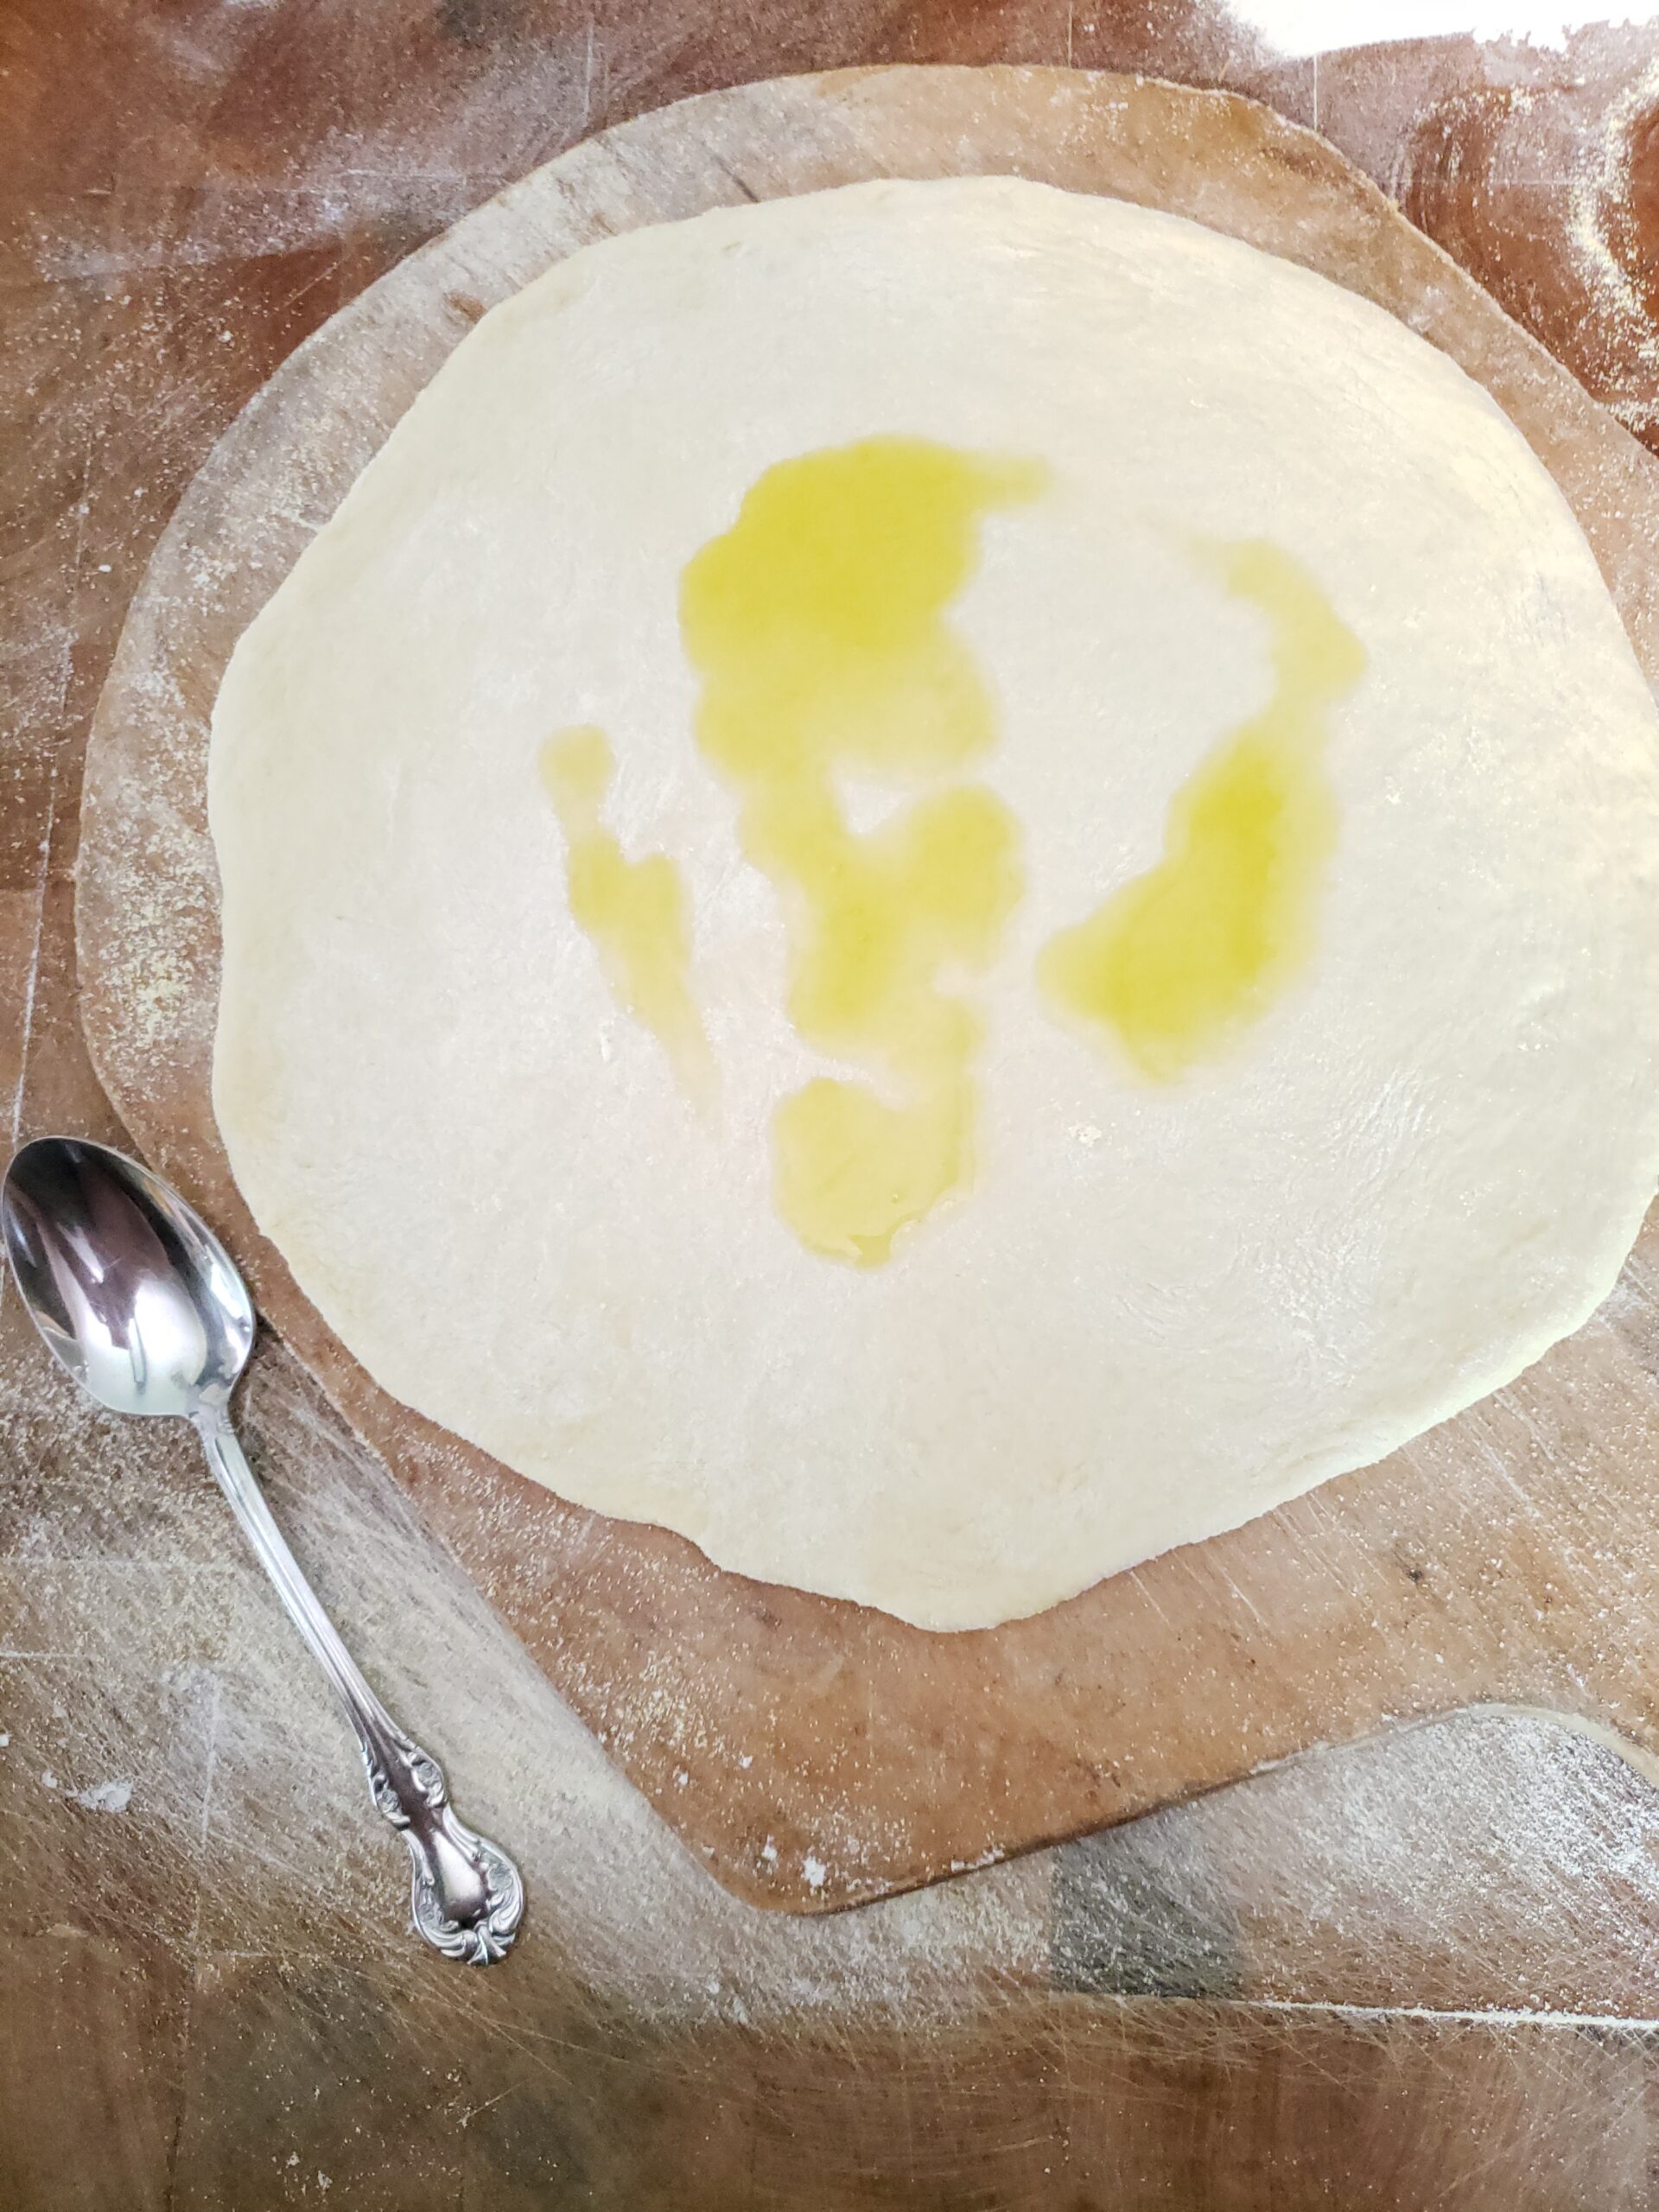 Pizza dough on wooden pizza paddle with olive oil on dough.